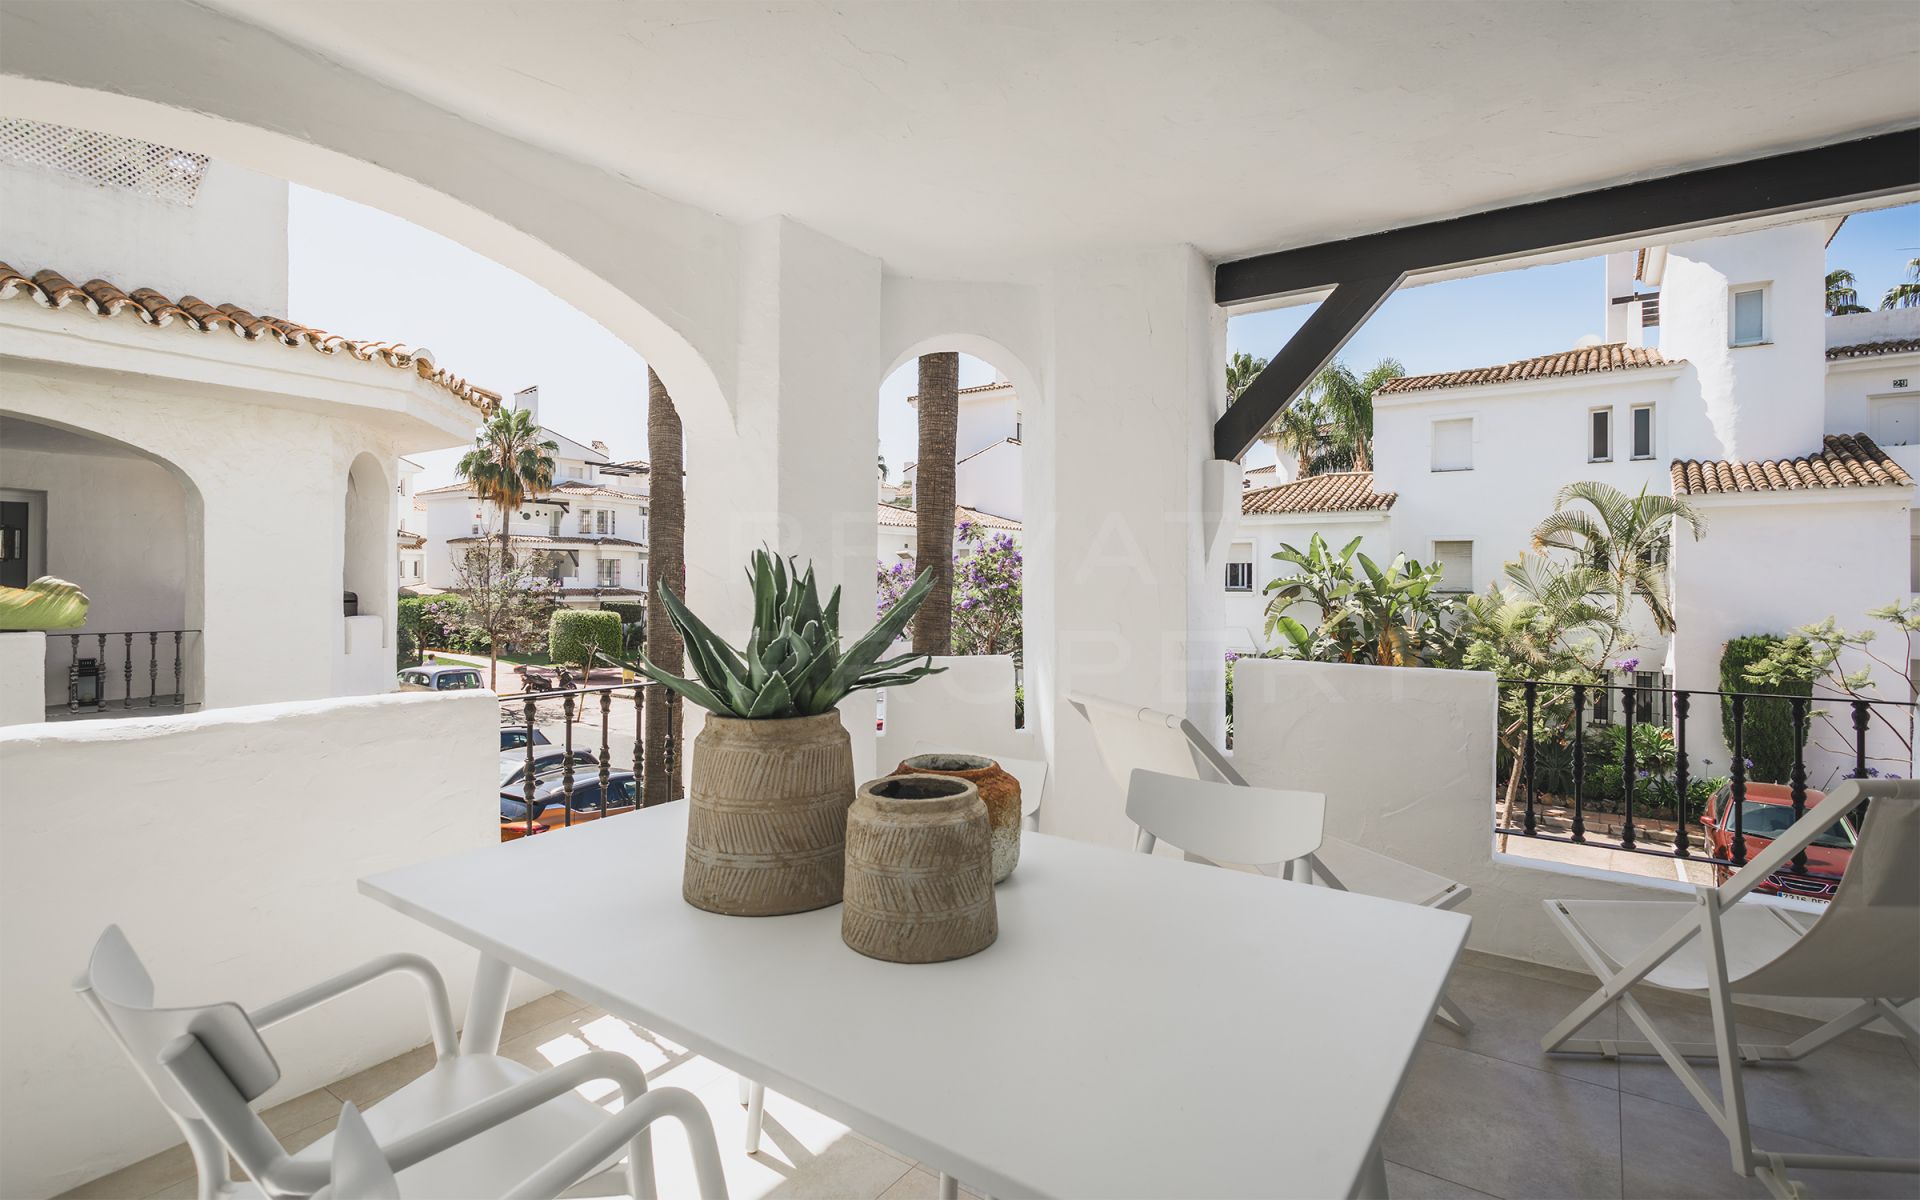 Immaculately renovated apartment in Los Naranjos